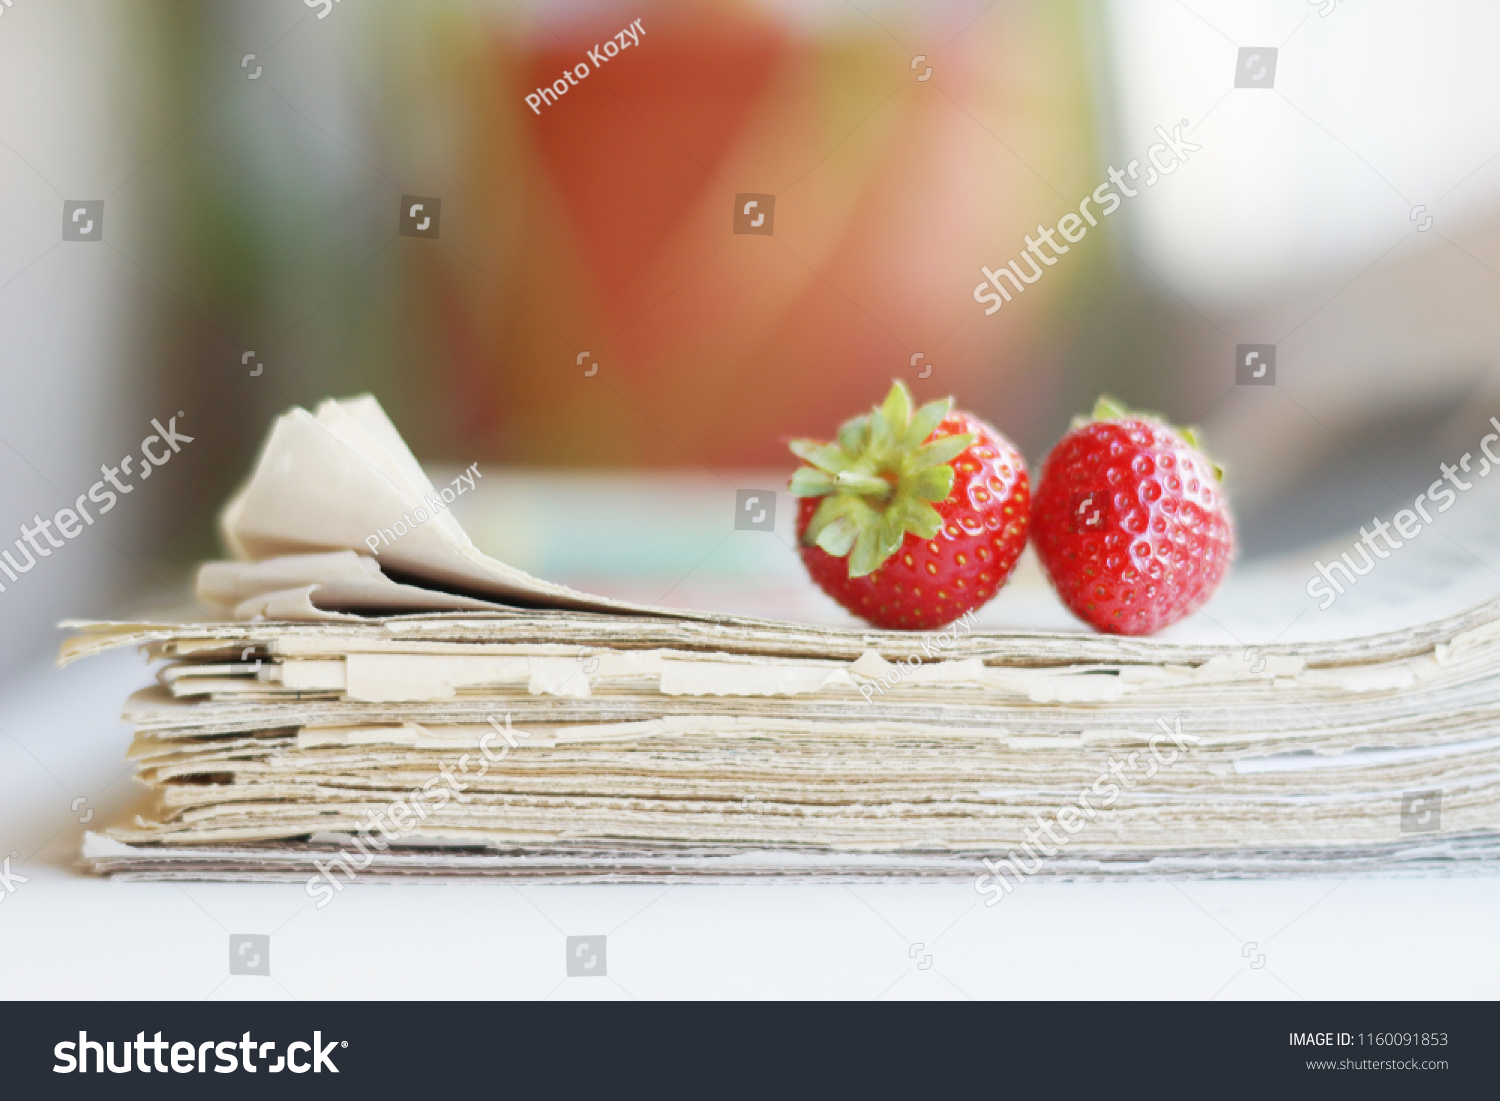 Stack of newspapers and strawberries. Daily journals with headlines and articles and fresh fruits. Concept for juicy news                                      #1160091853